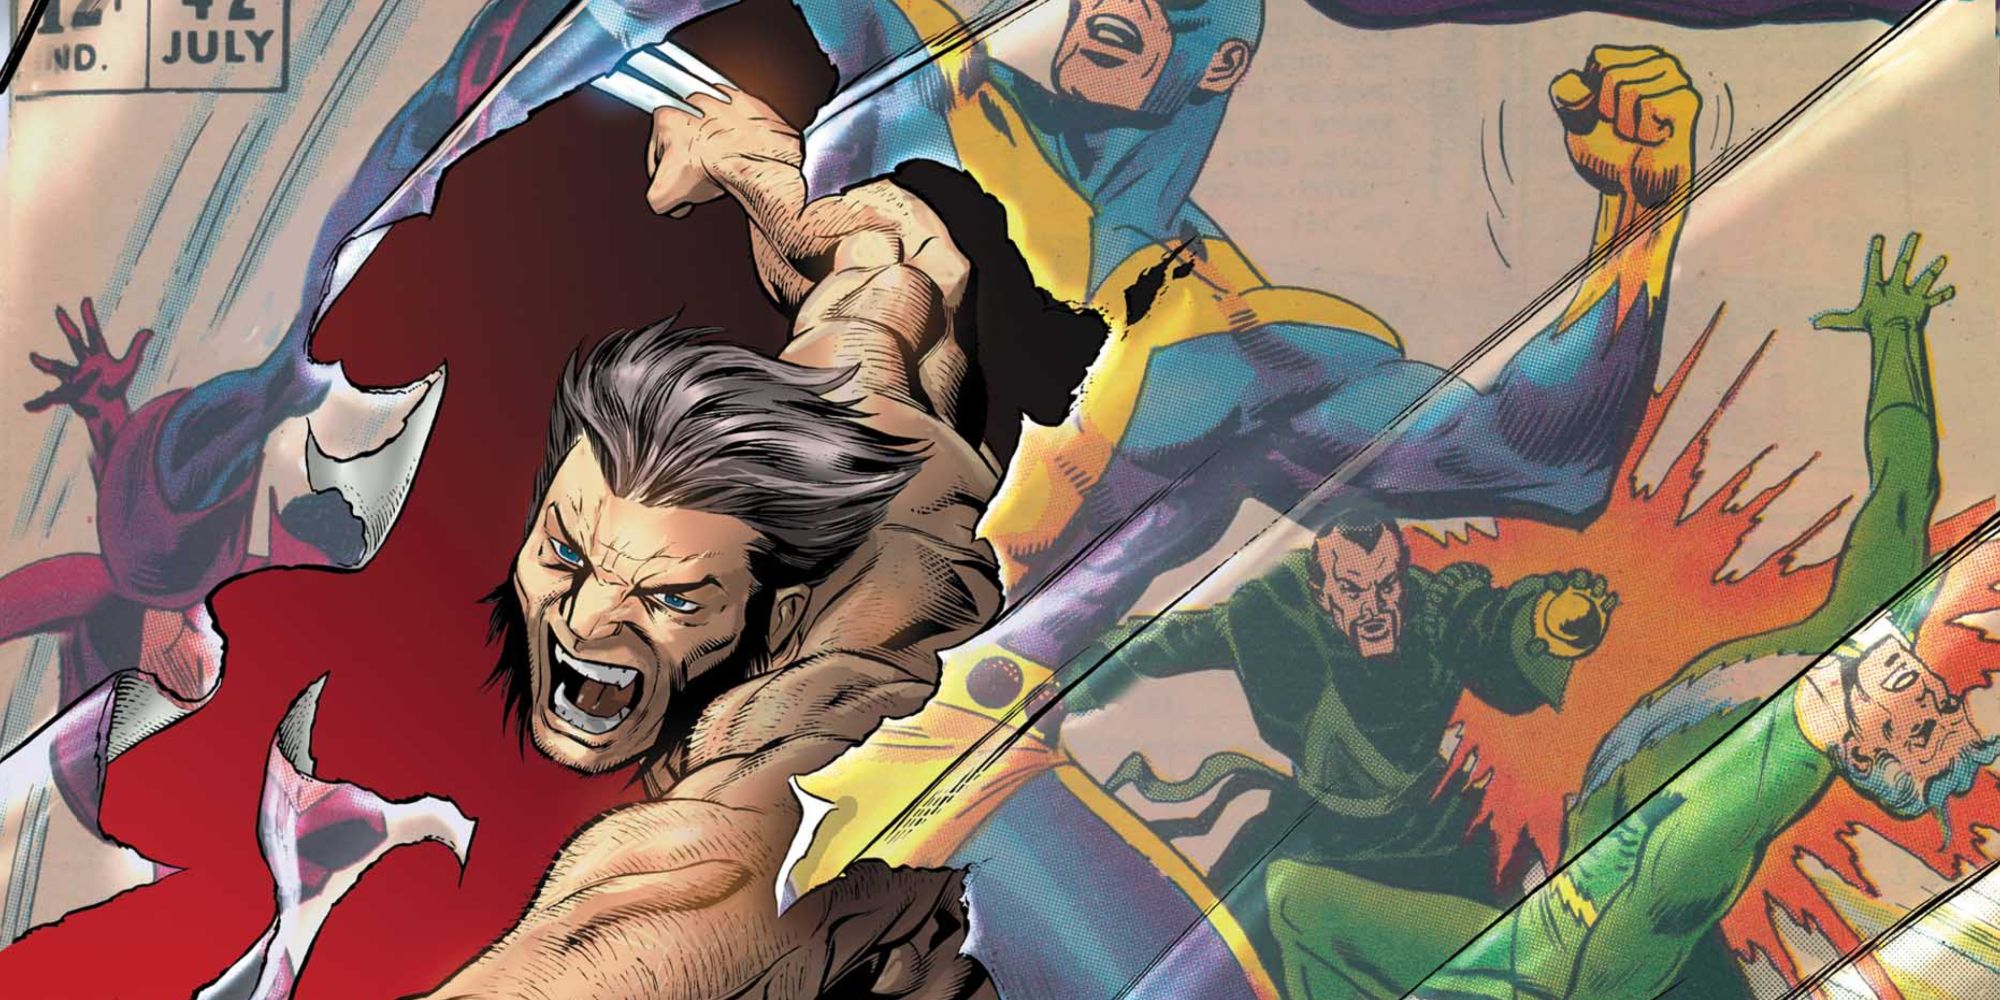 Wolverine rips through an iconic Avengers cover in Marvel Comics.